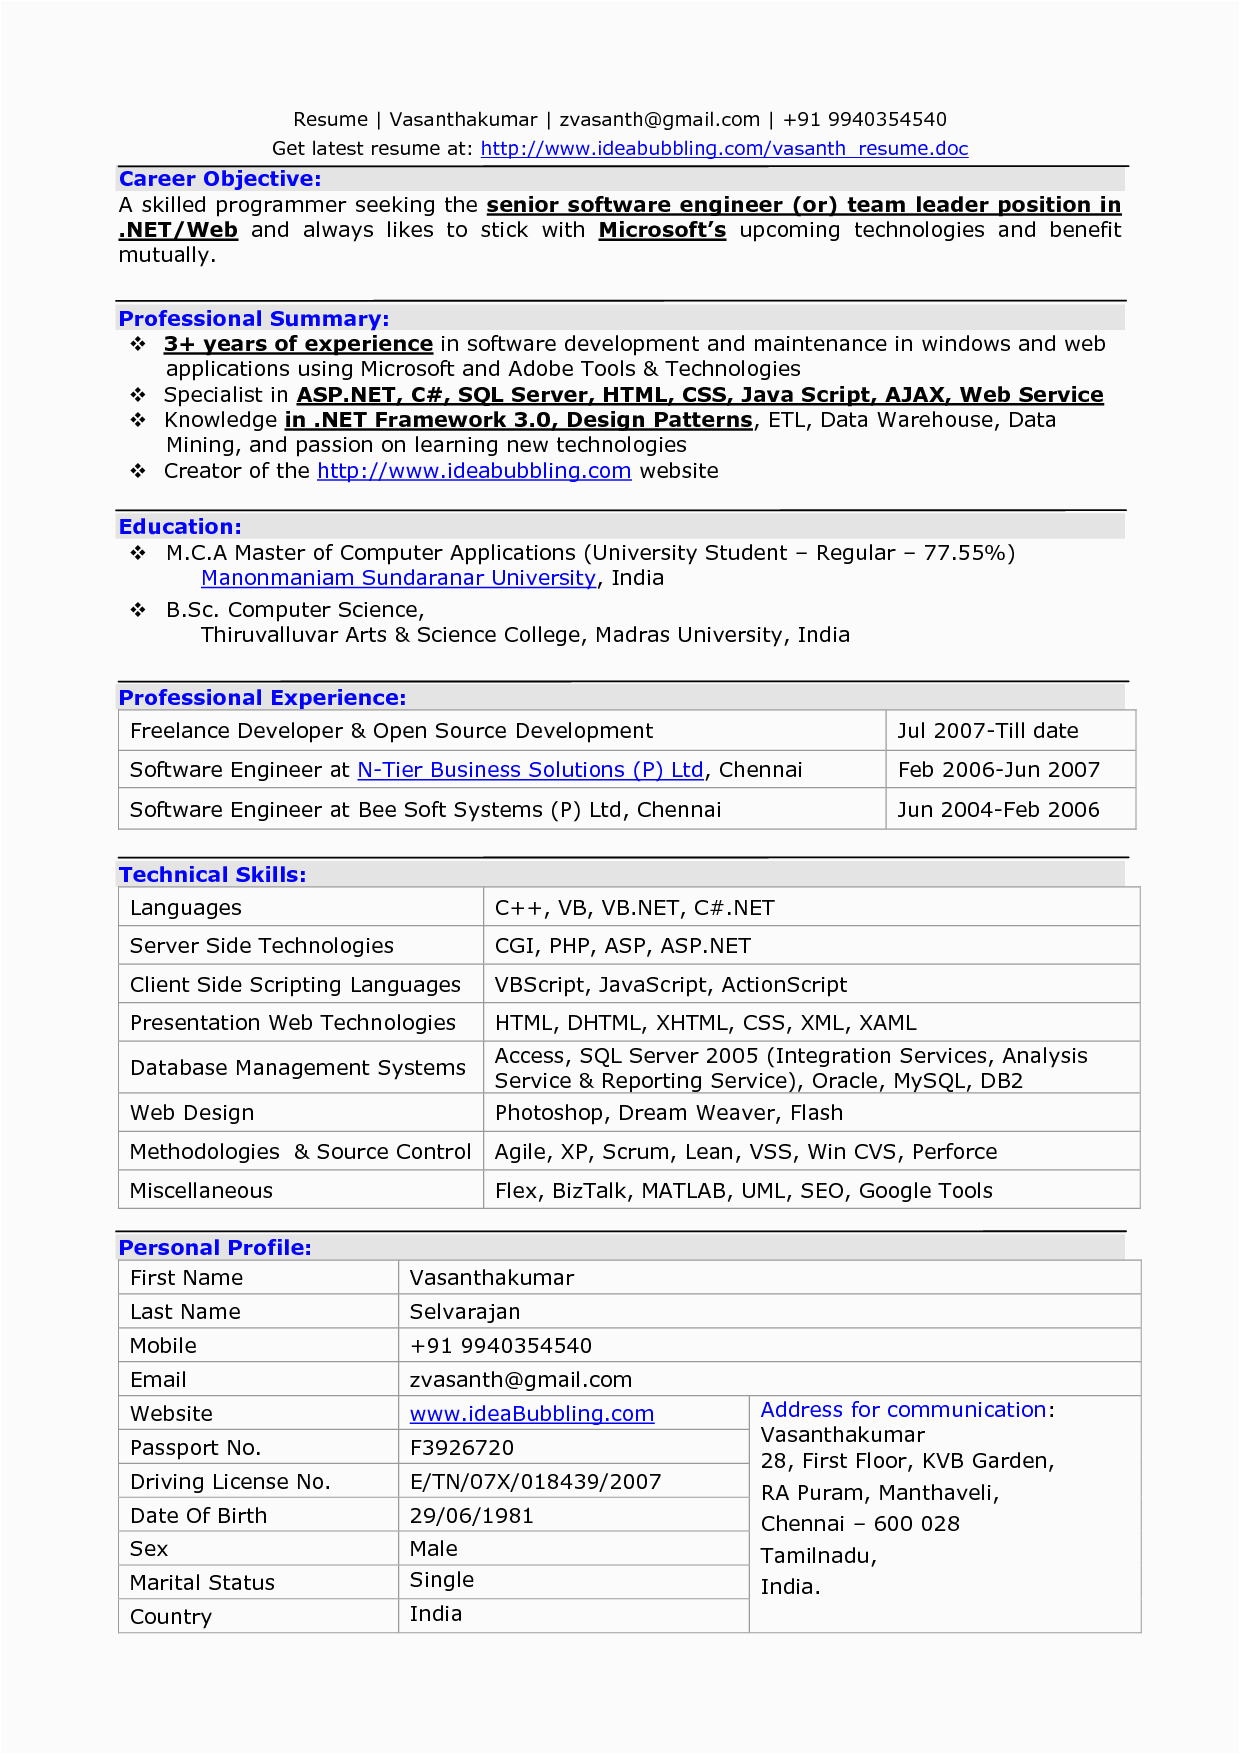 Sample Resume Objective for software Engineer software Engineer Resume Objective Examples Best Resume